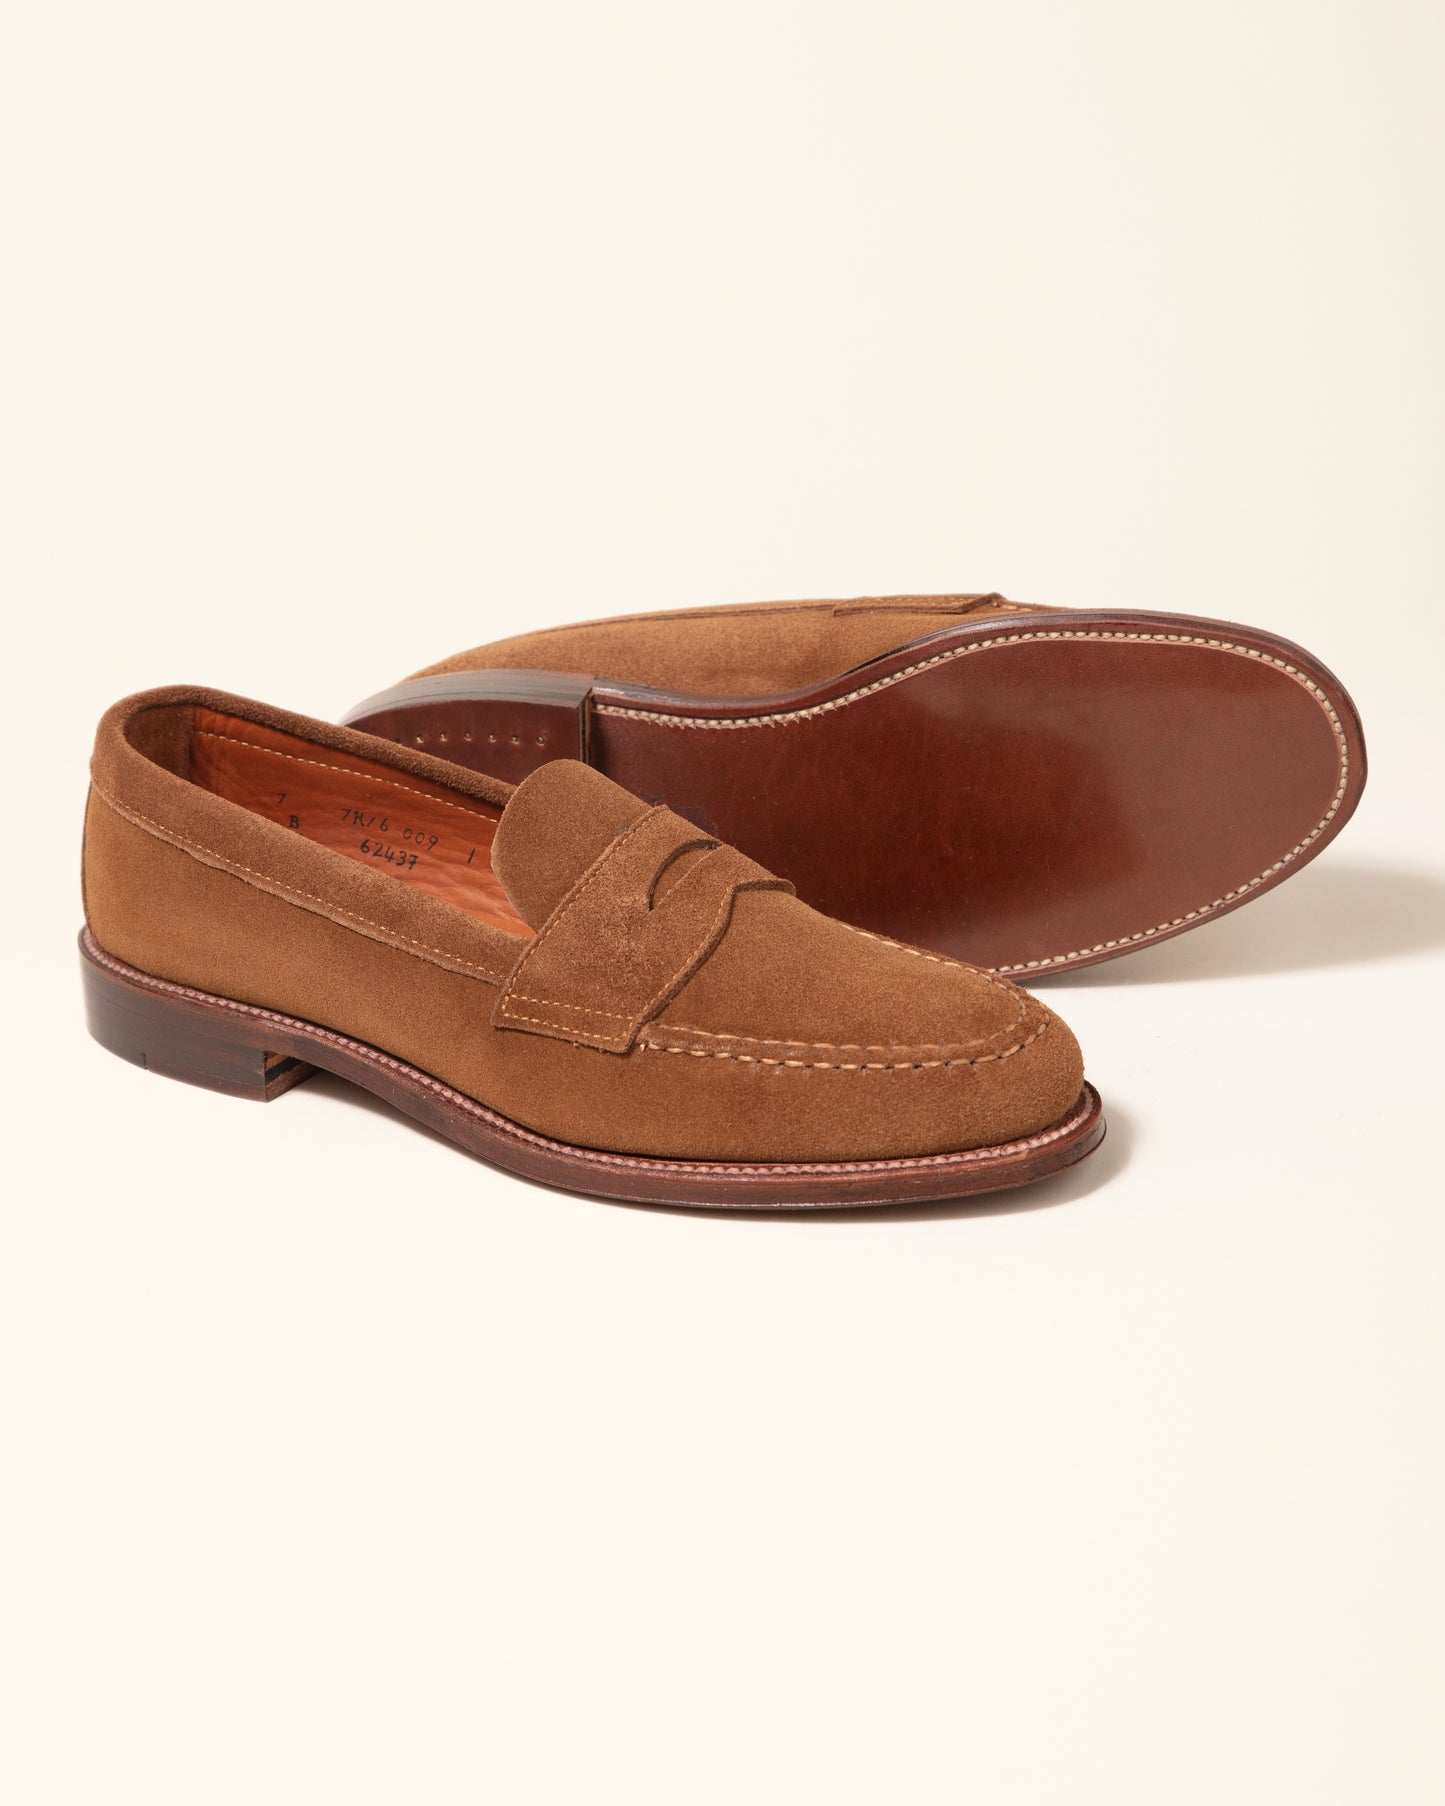 6243F Unlined Leisure Handsewn Penny Loafer in Snuff Suede, Van Last